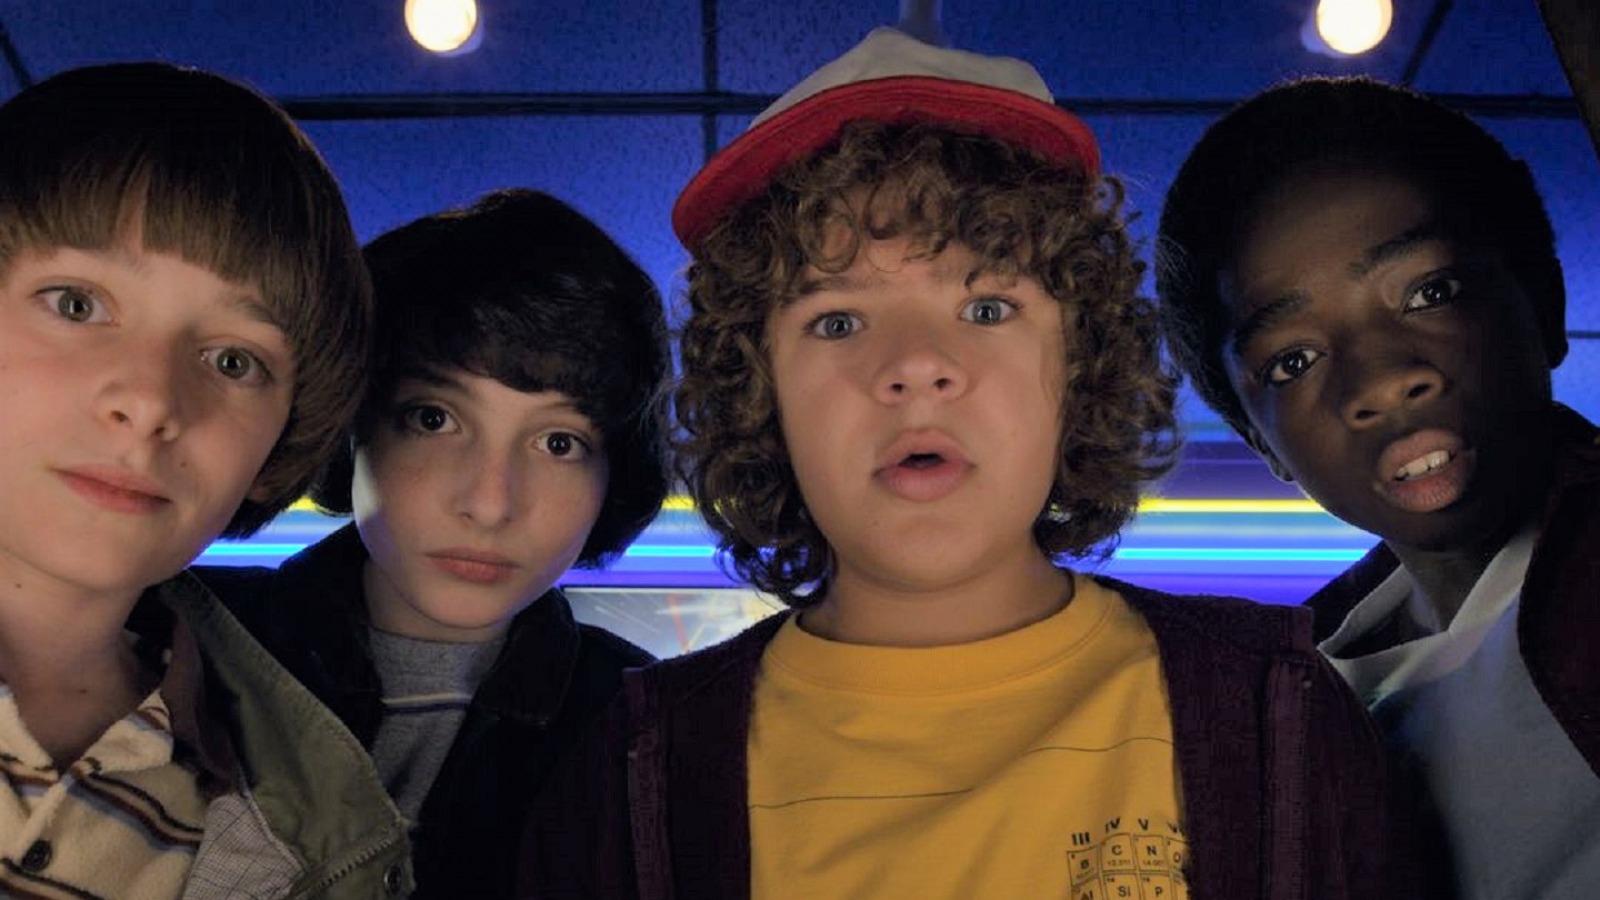 24 Who Is The Oldest Cast Member On Stranger Things